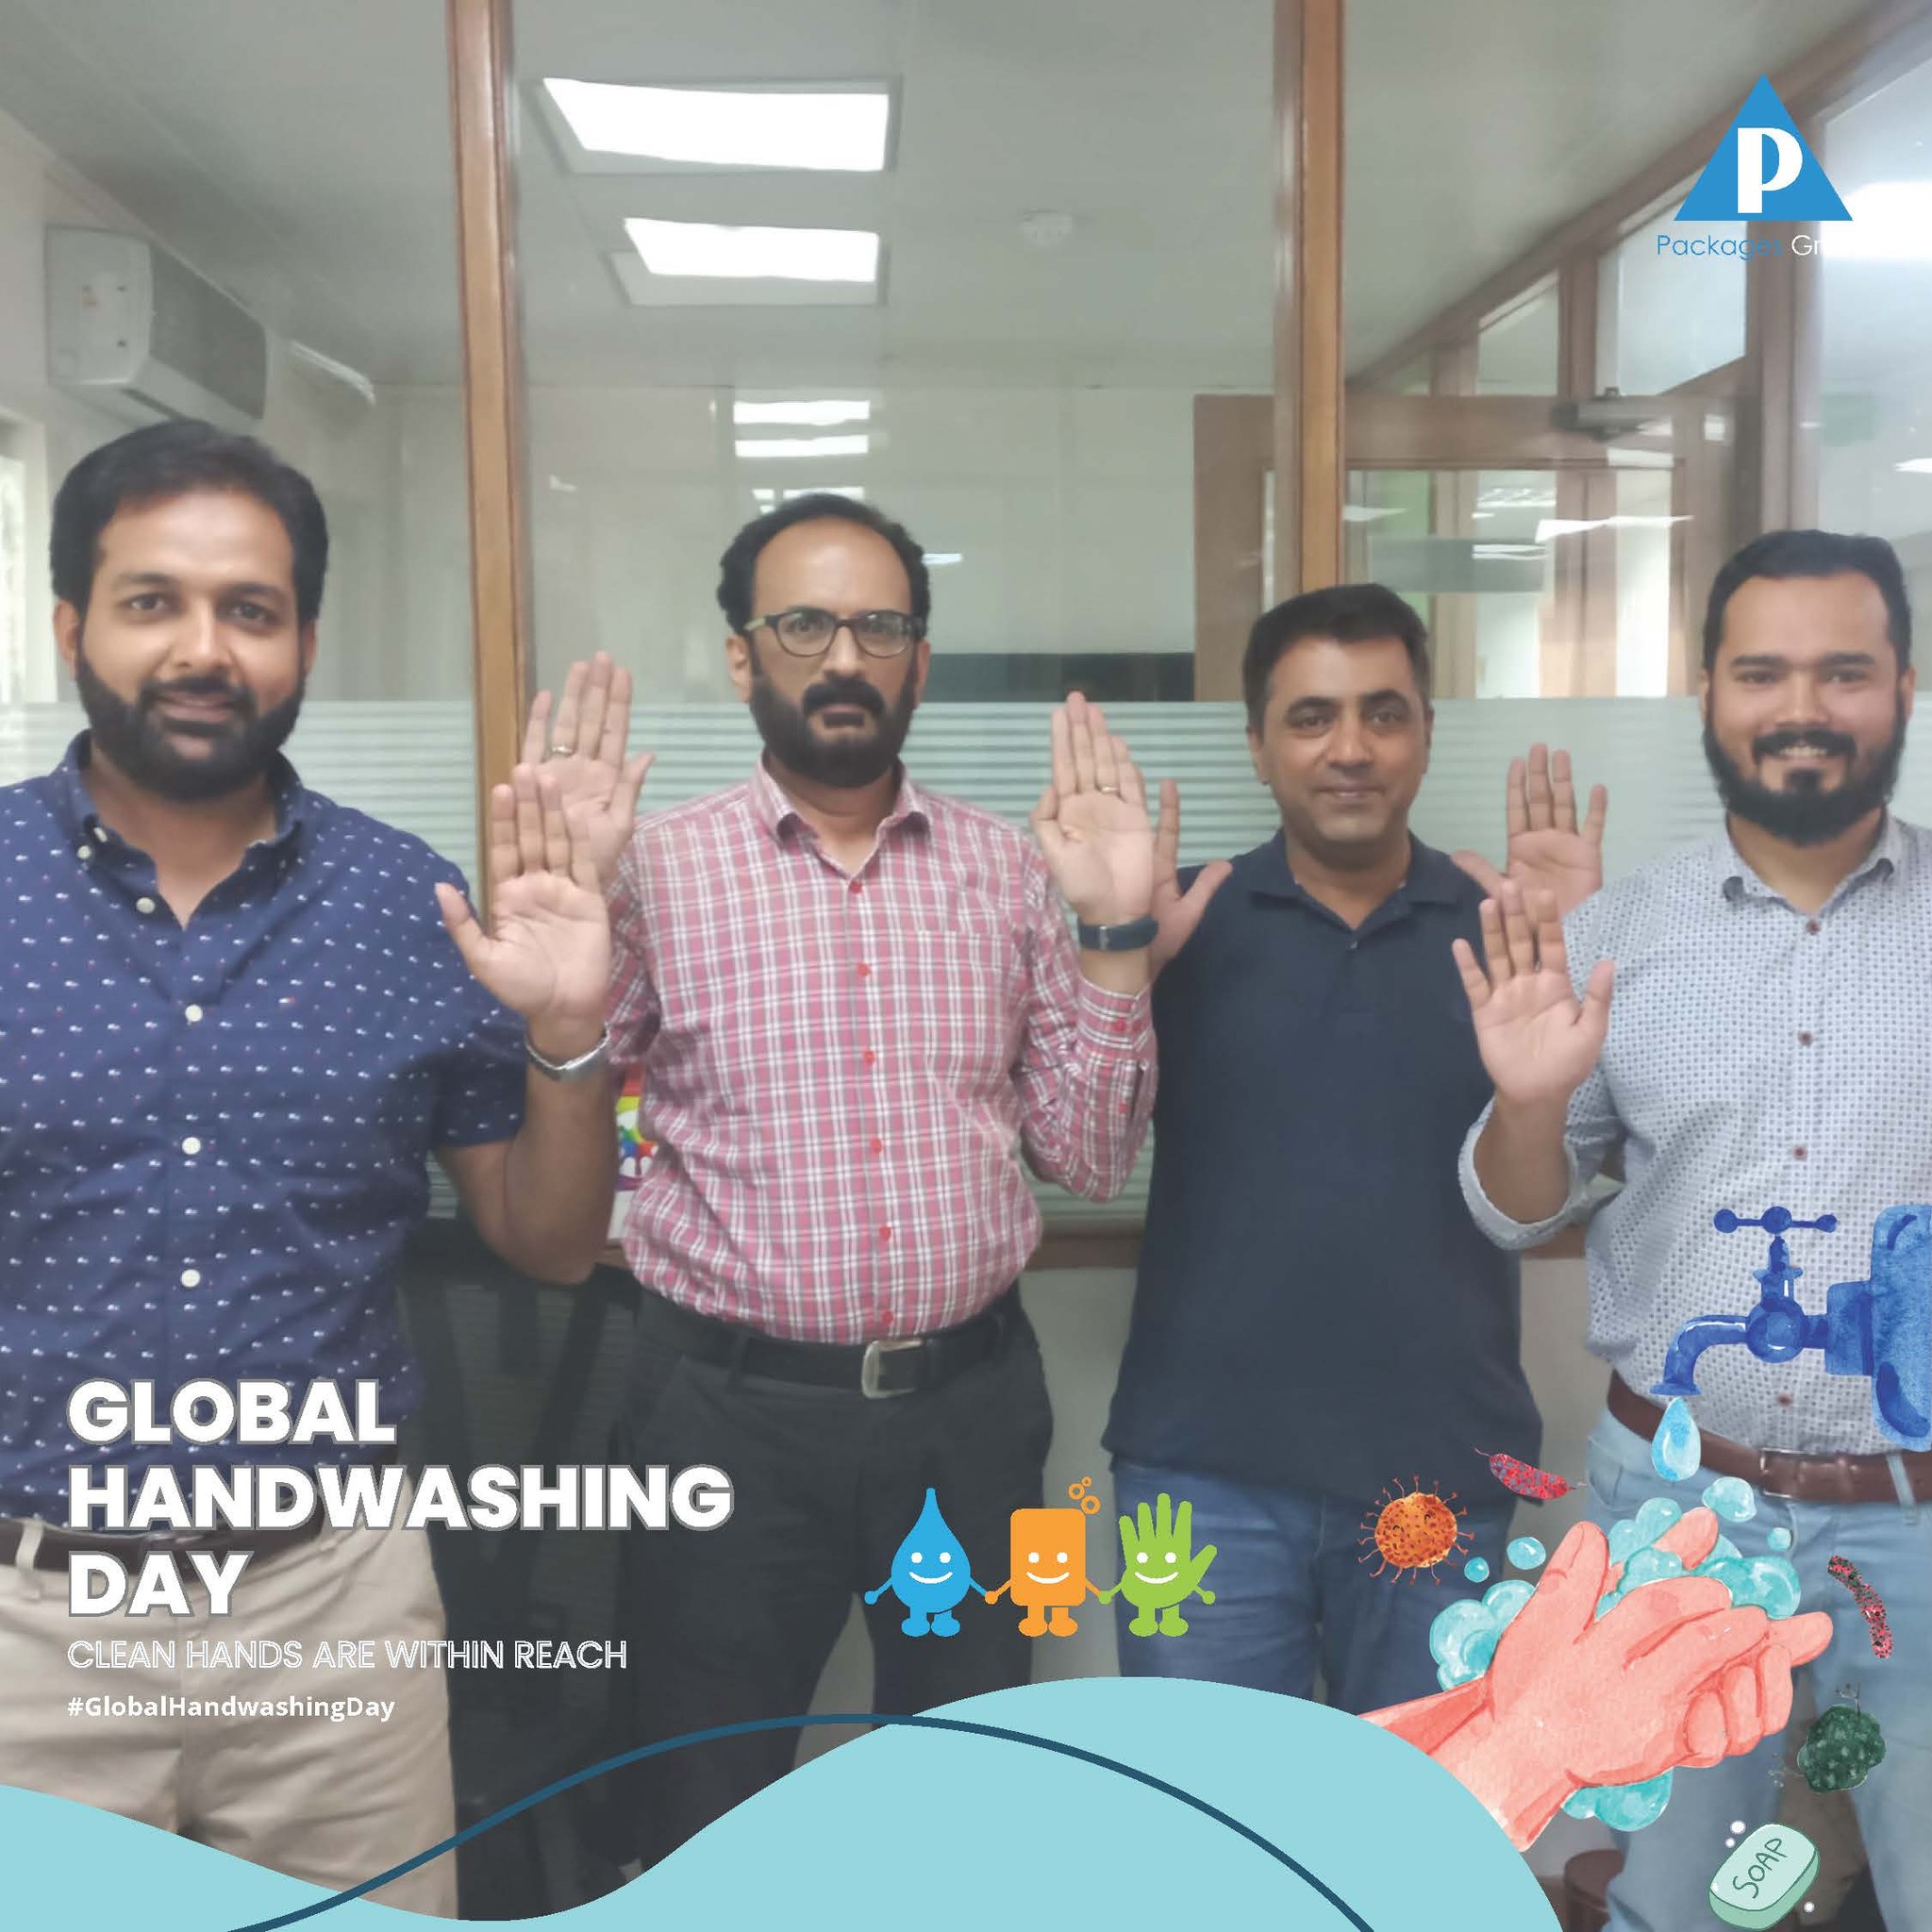 Global Handwashing Day celebrated across the Packages Group.5